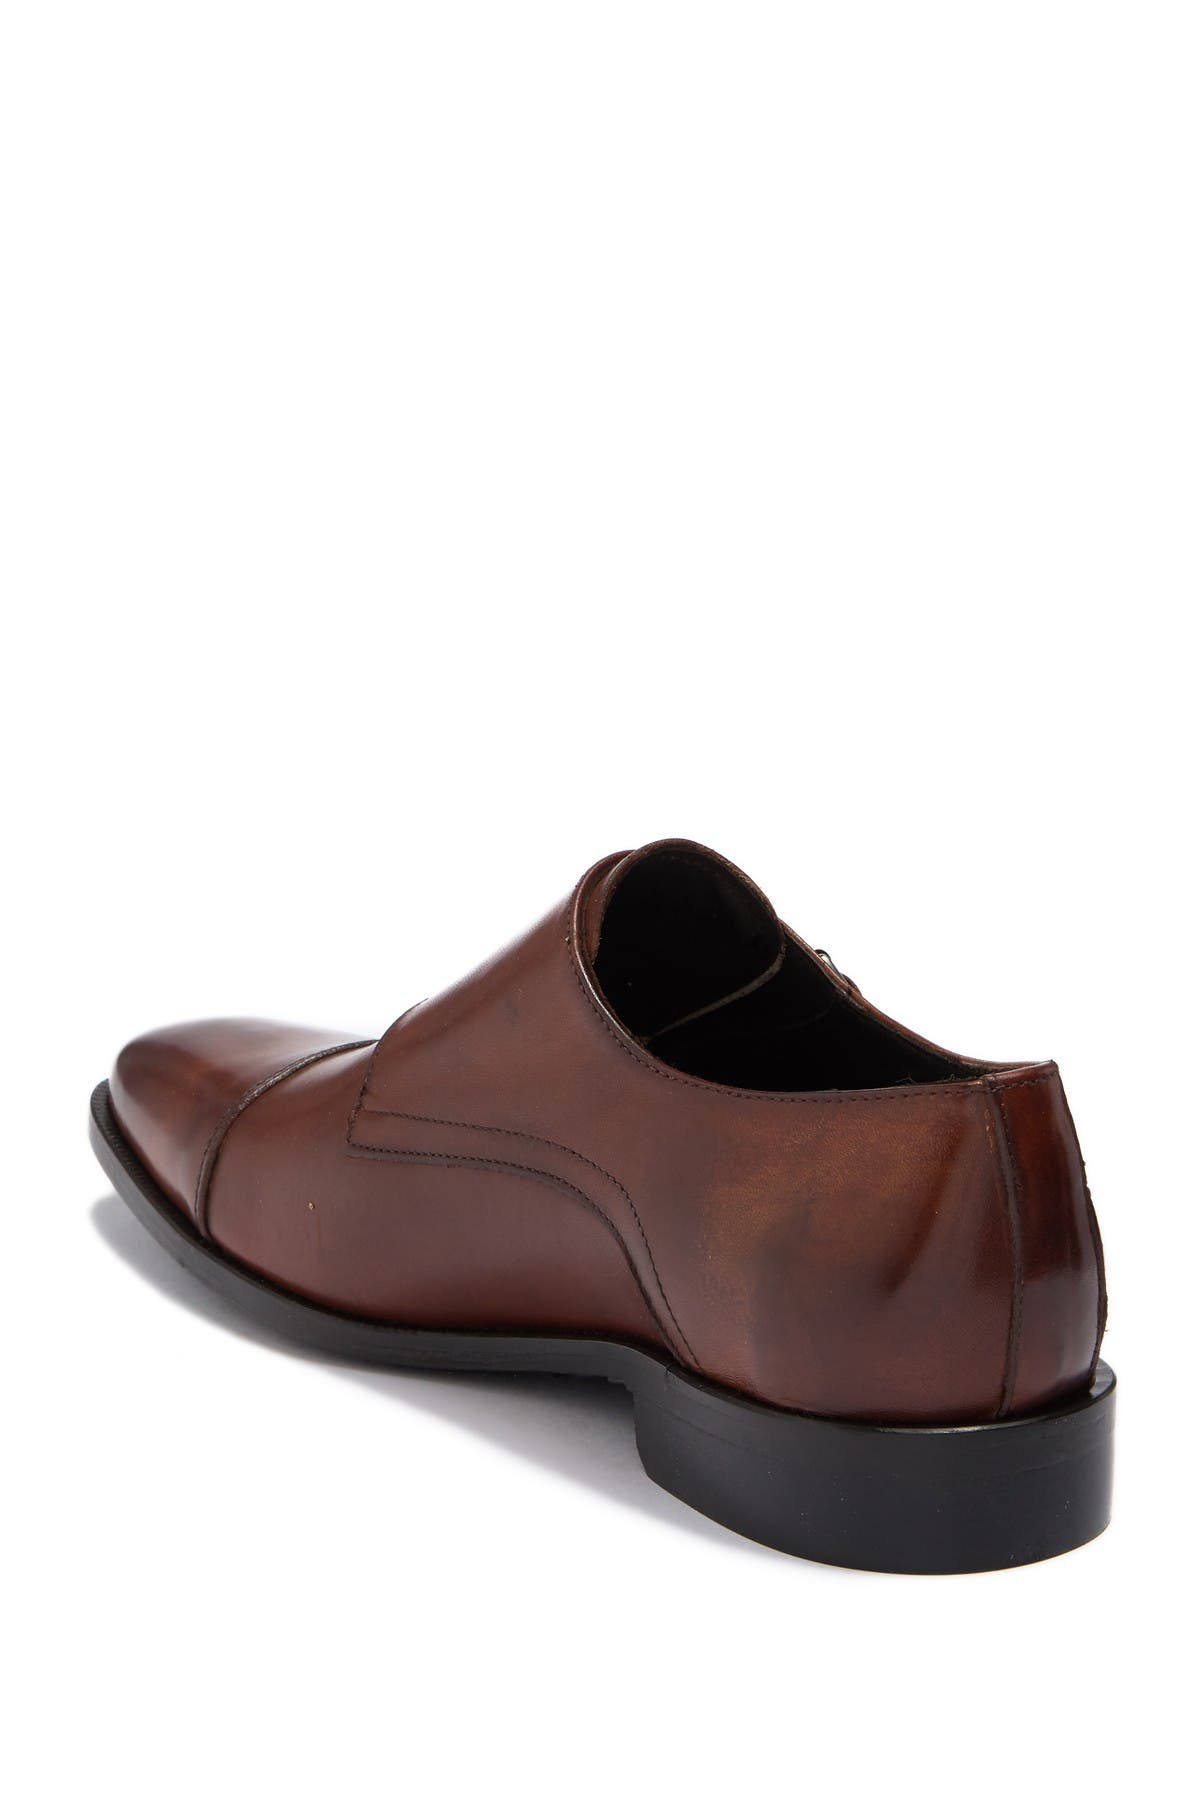 Zane Leather Double Monk Strap Loafer 